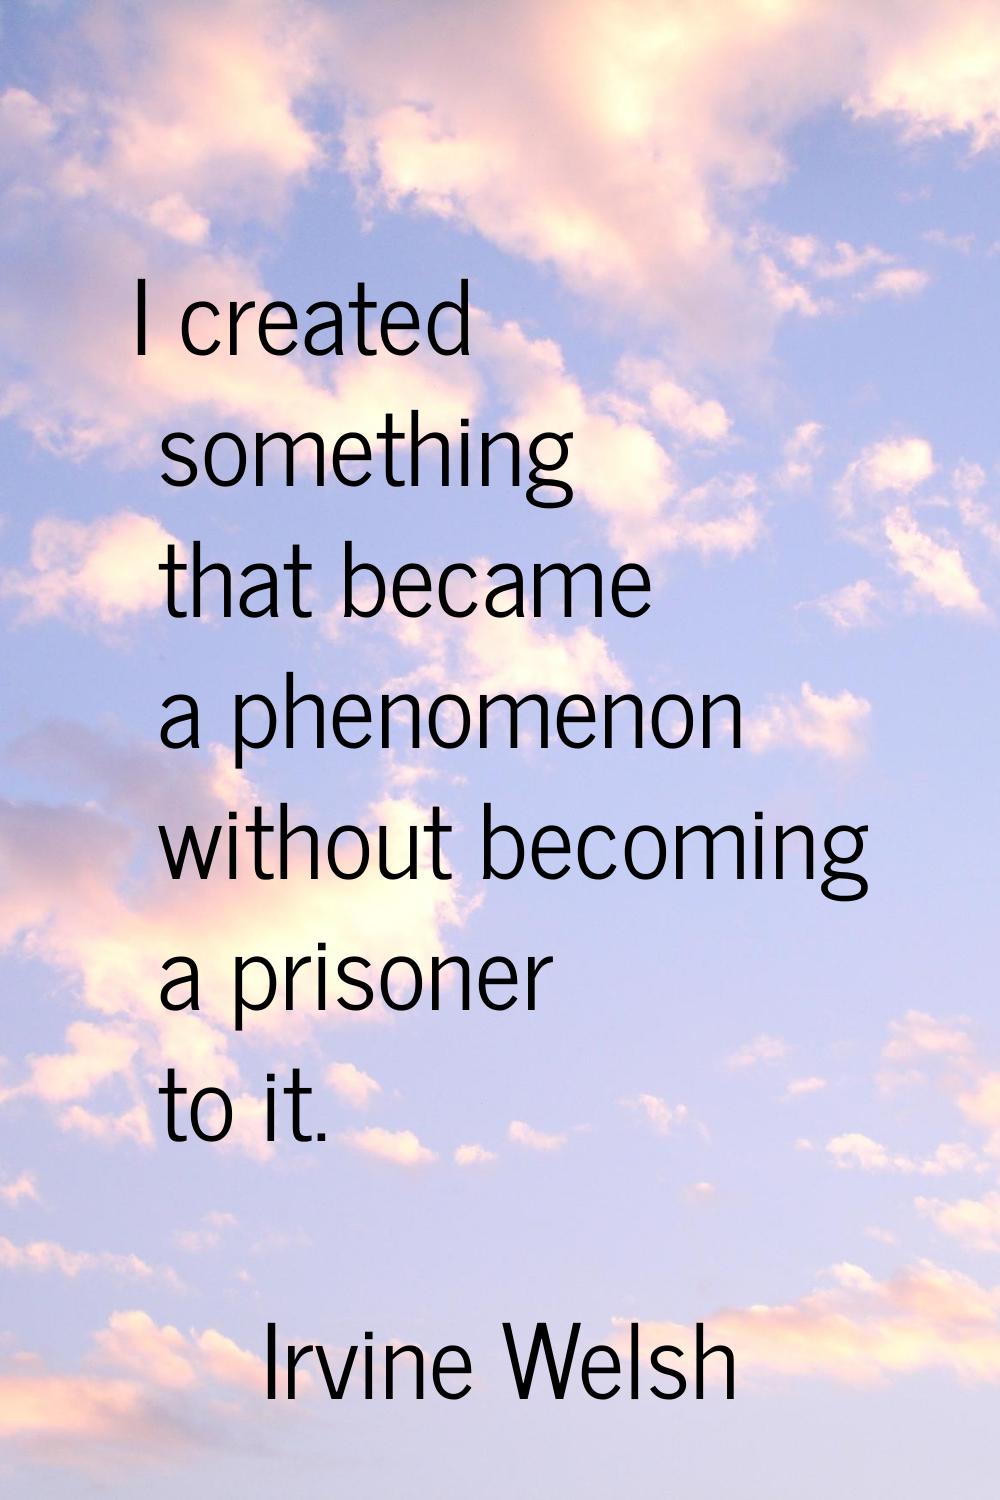 I created something that became a phenomenon without becoming a prisoner to it.